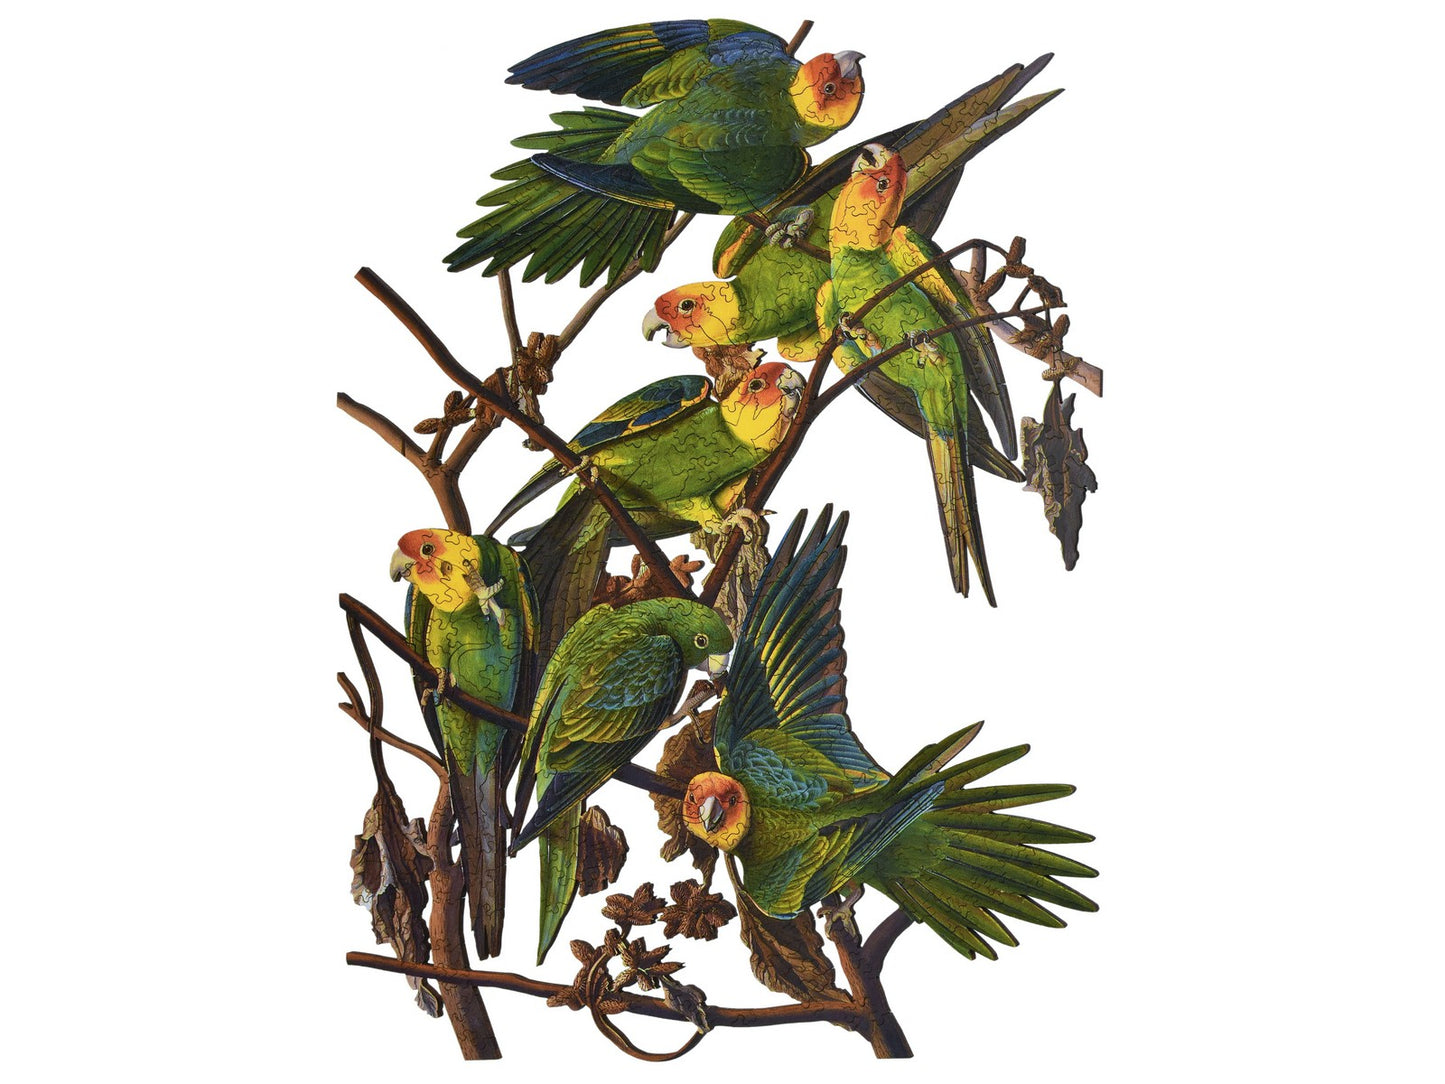 The front of the puzzle, Carolina Parakeet, which shows a group of birds sitting on branches.